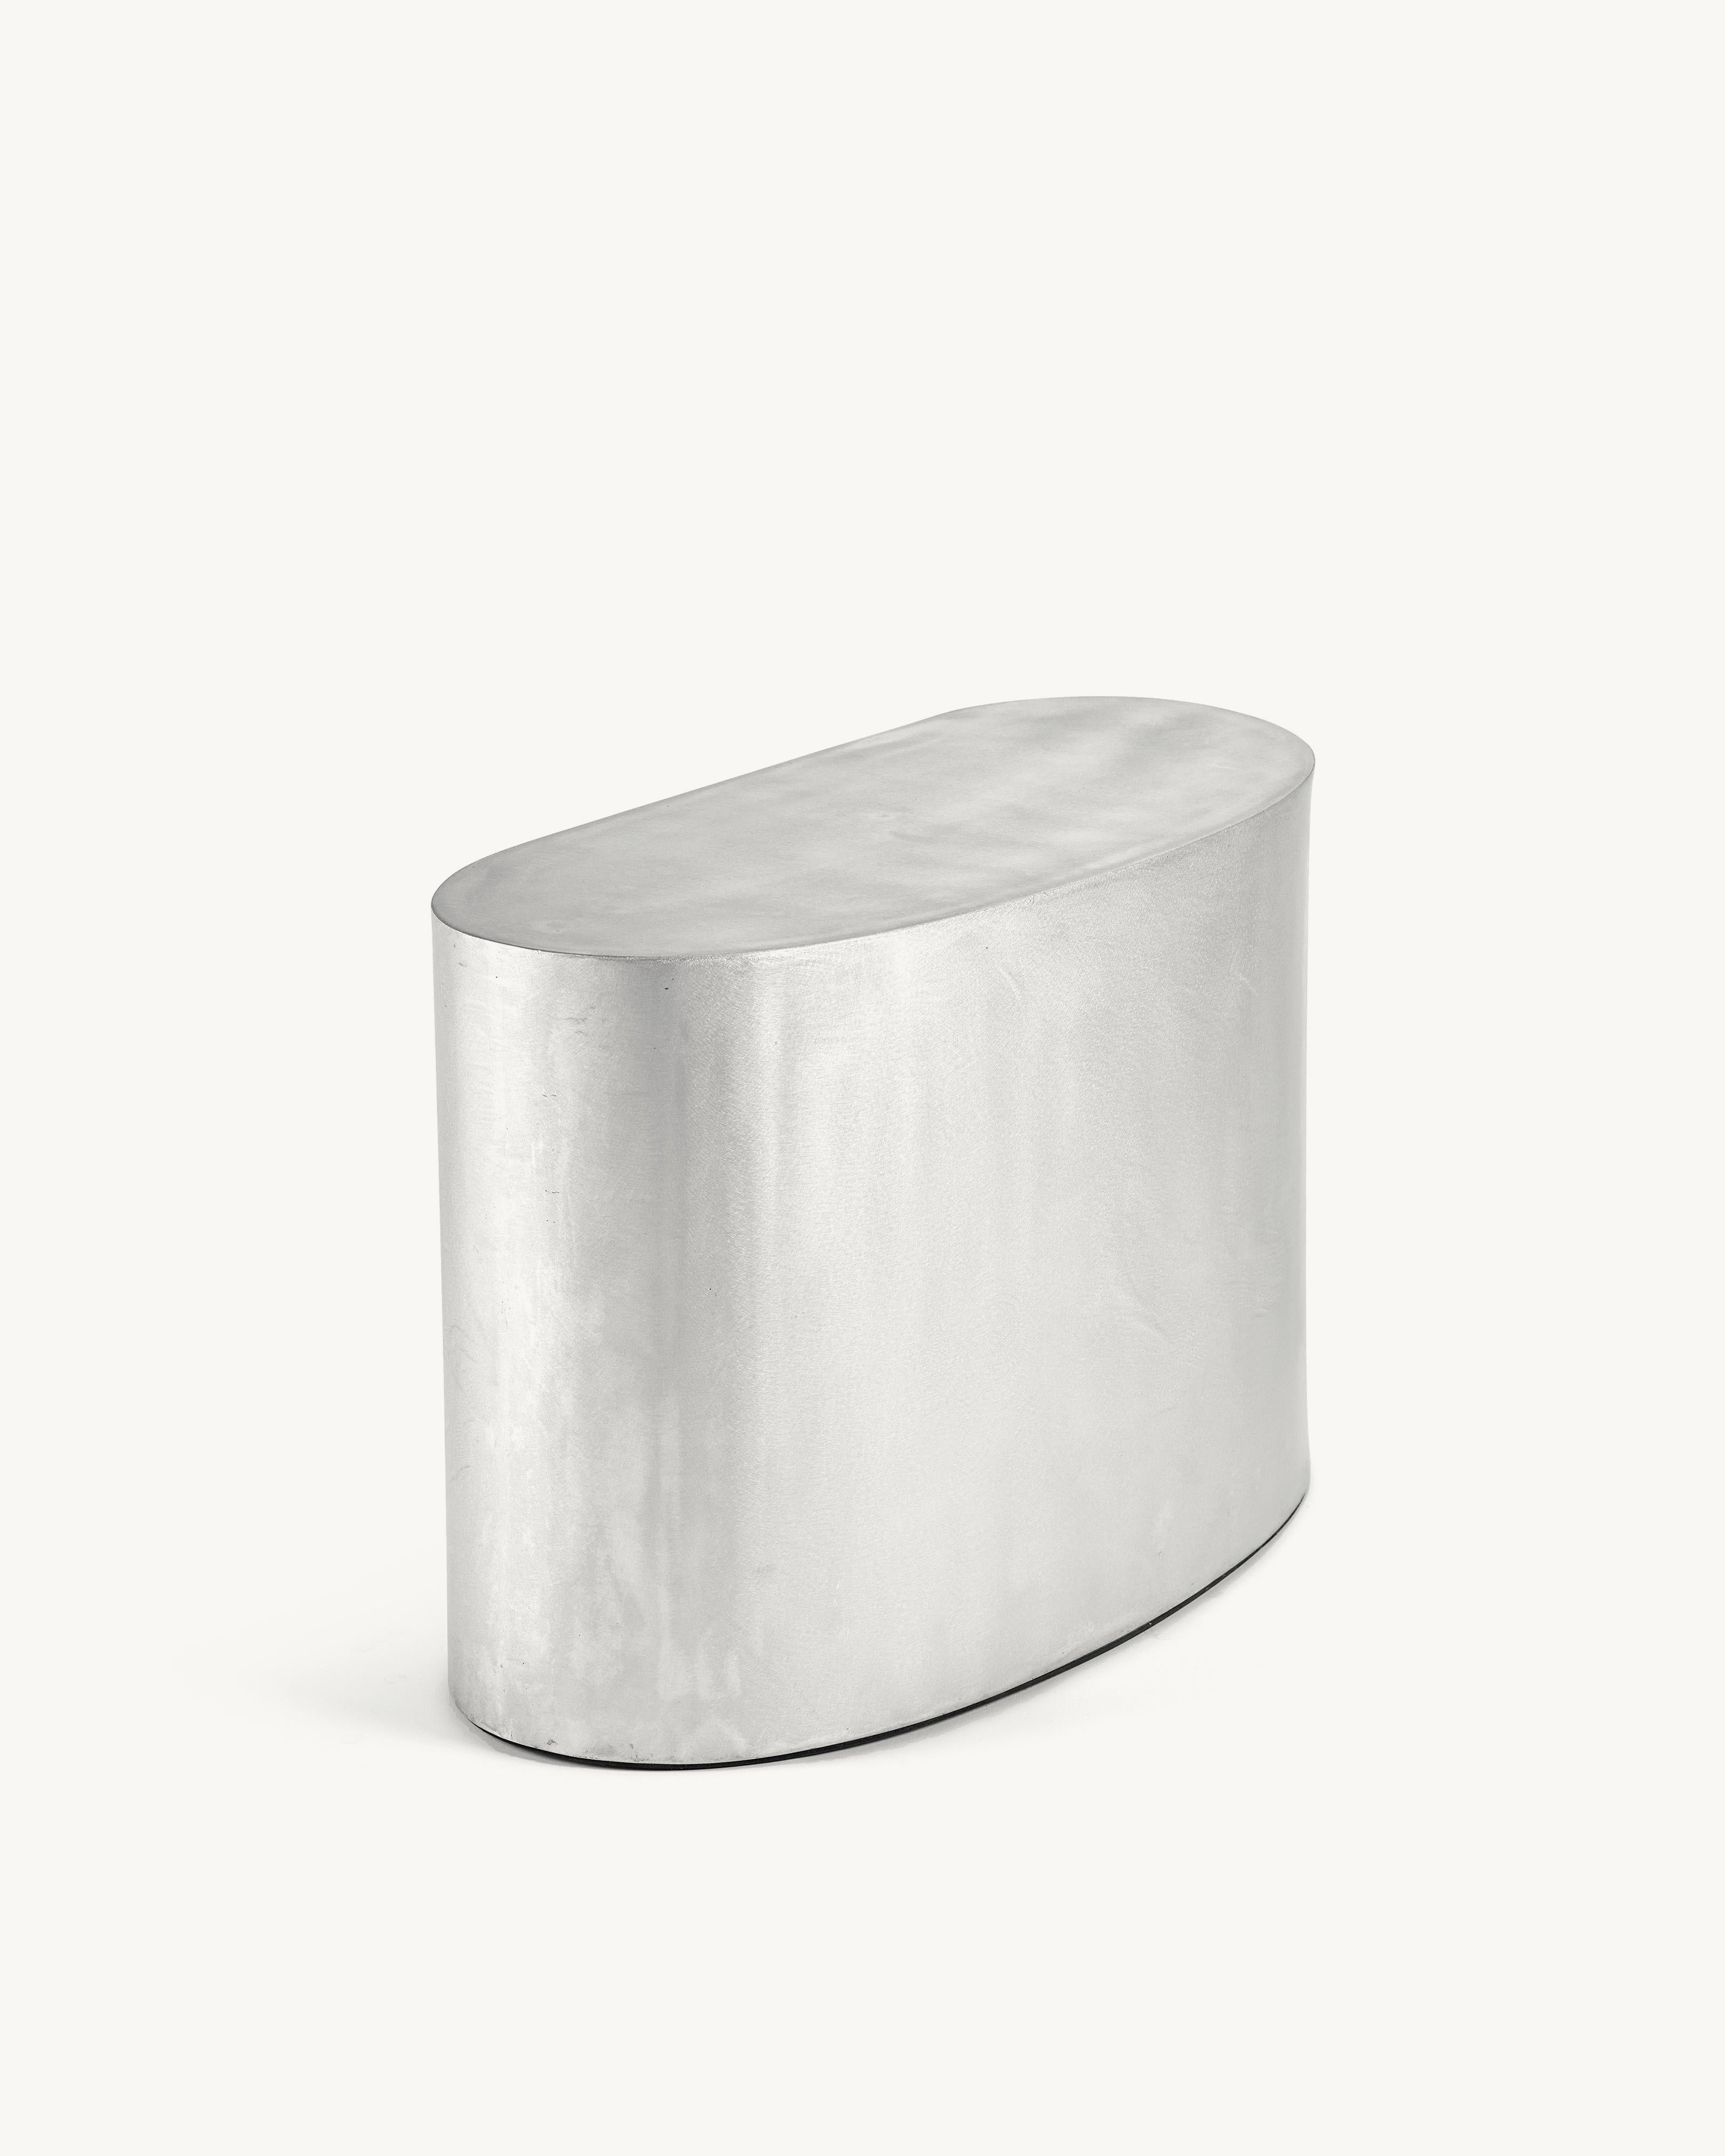 Side Table 'Assemble' by Destroyers/Builders
Finish: Aluminum
Dimensions: L 58 W 27 H 45 CM

The Assemble sofa designed by destroyers/builders encourages exactly what its name suggests: to assemble your own sofa. The asymmetrical cushions are